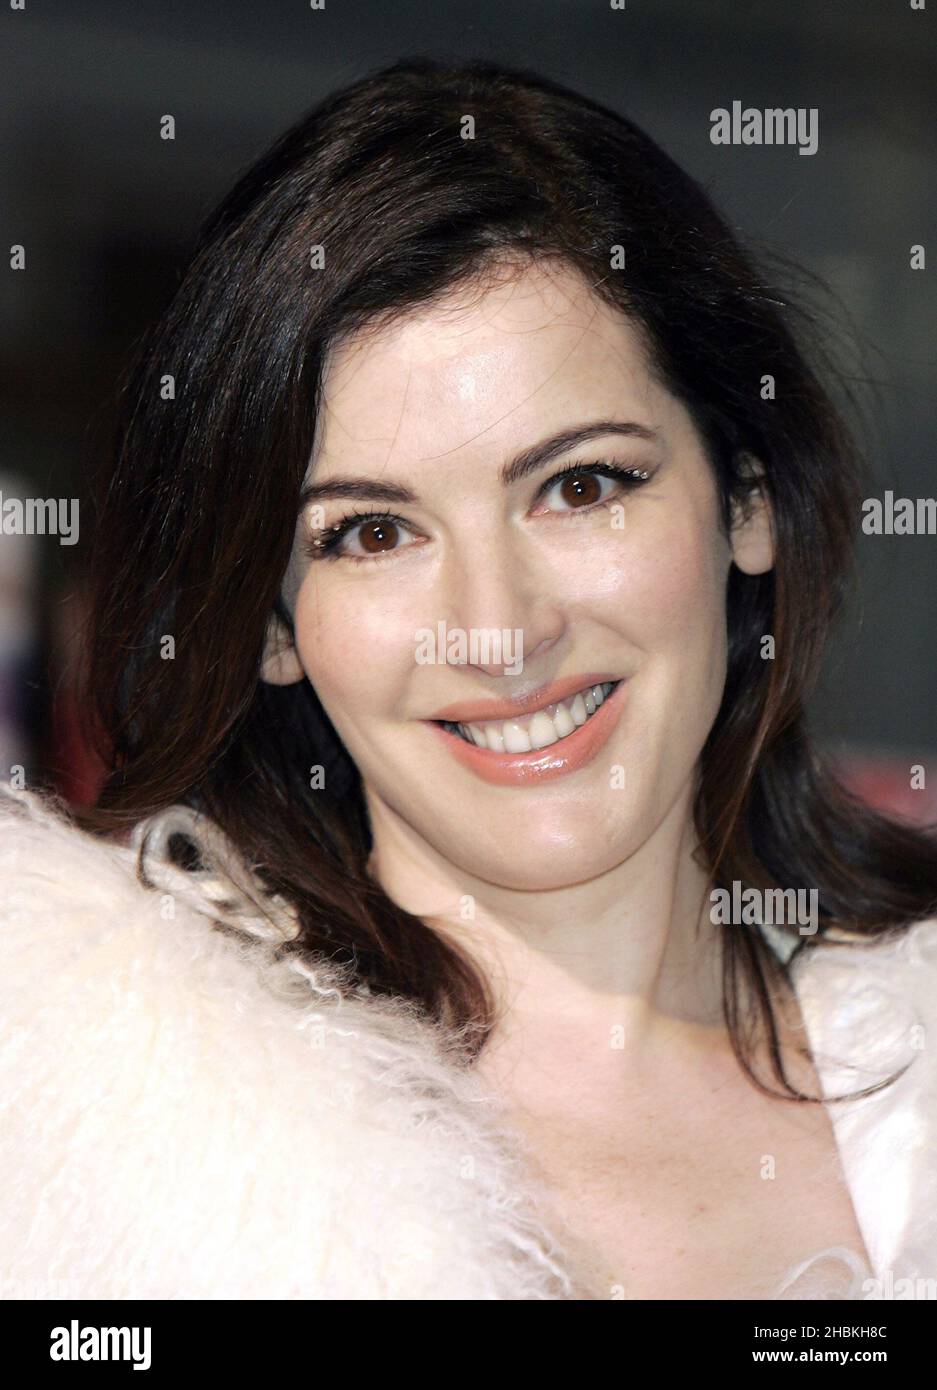 Nigella Lawson during a photocall for a signing session of her book 'Nigella Christmas: Food, Family, Friends and Festivities', at Waterstones in Piccadilly, central London. Stock Photo